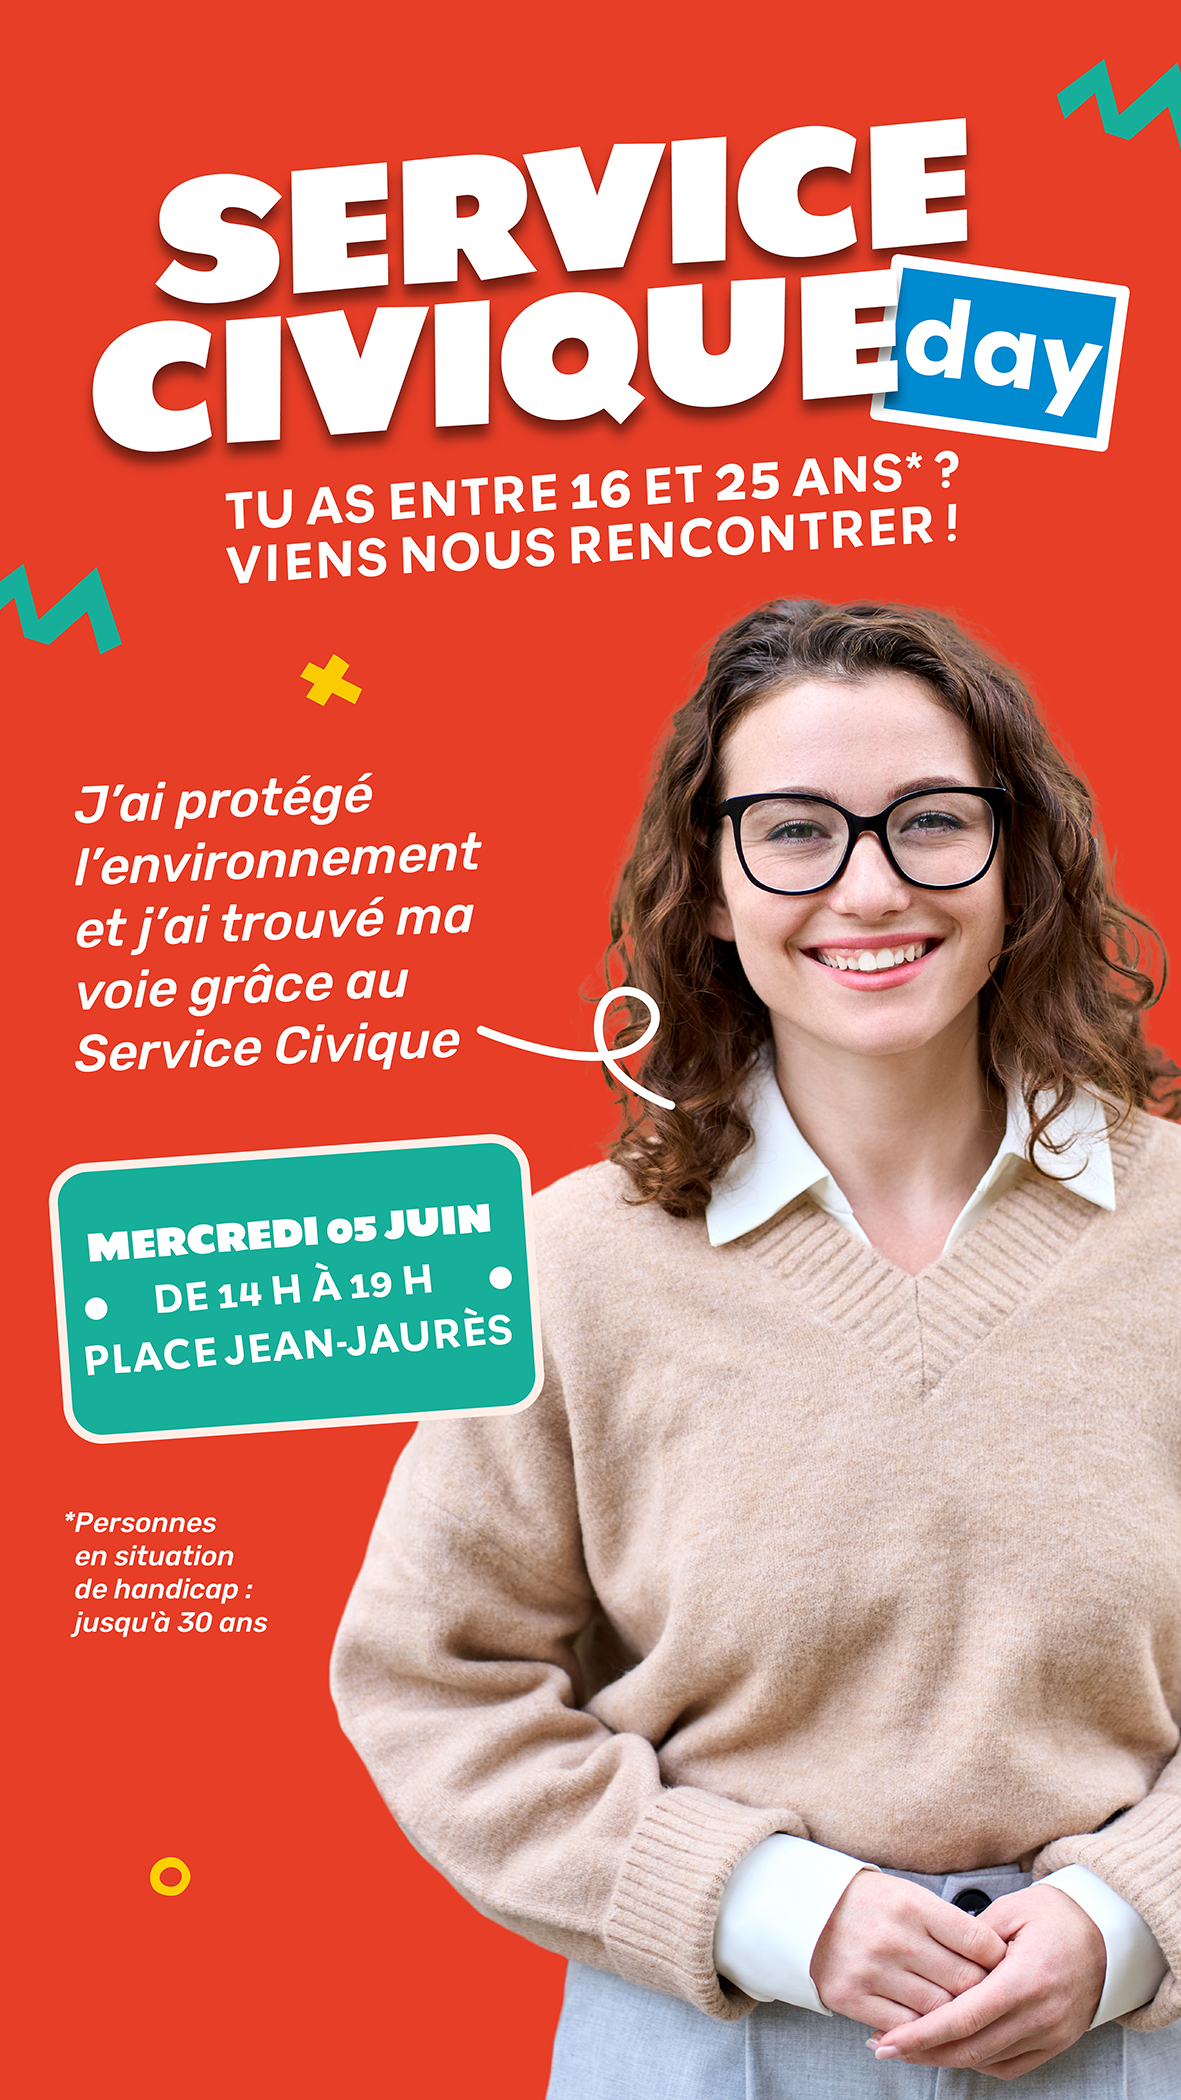 You are currently viewing Rencontre information service civique 16-25 ans